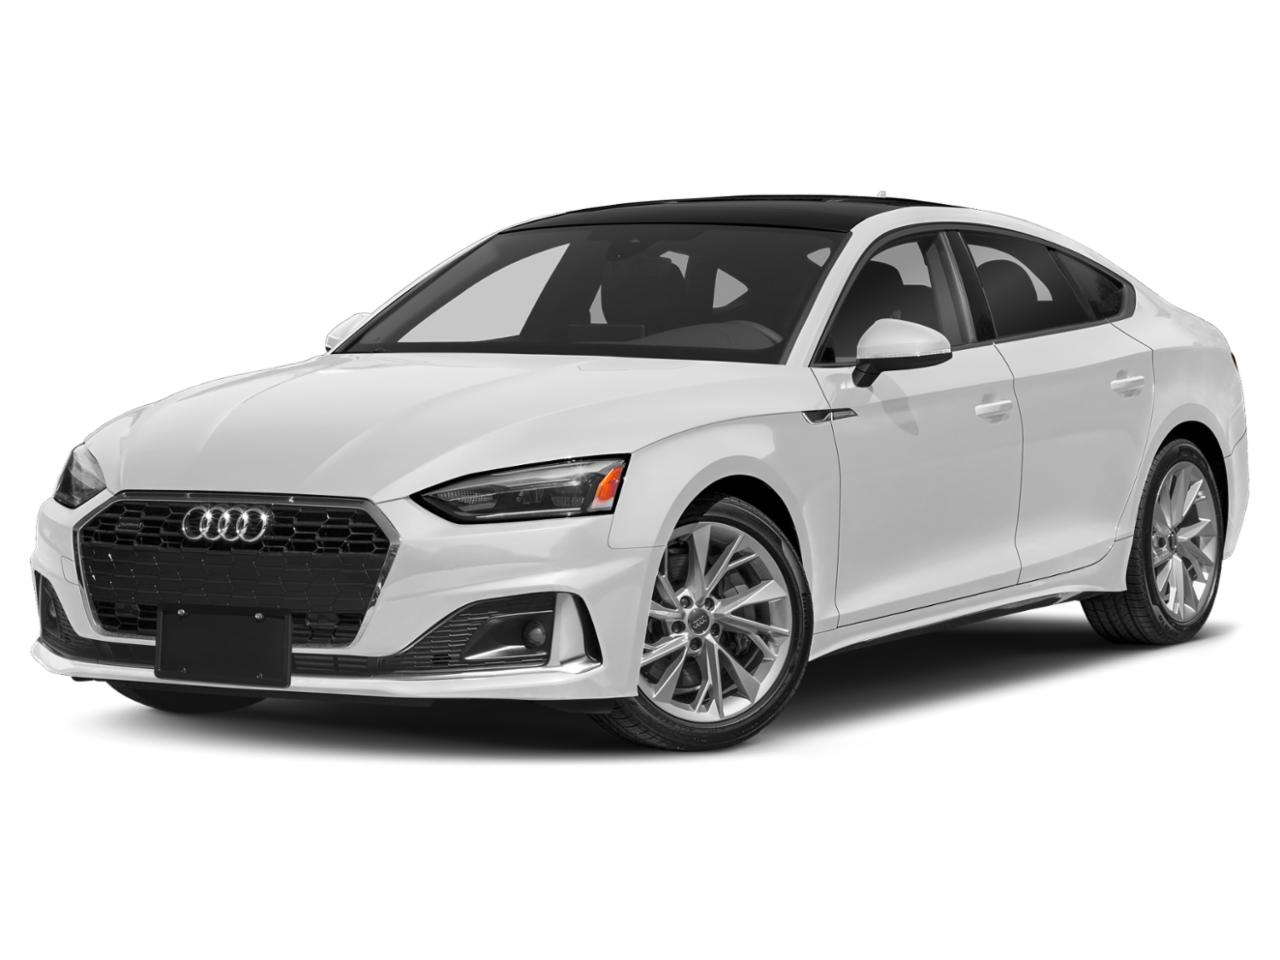 2021 Audi A5 Sportback Vehicle Photo in Allentown, PA 18103